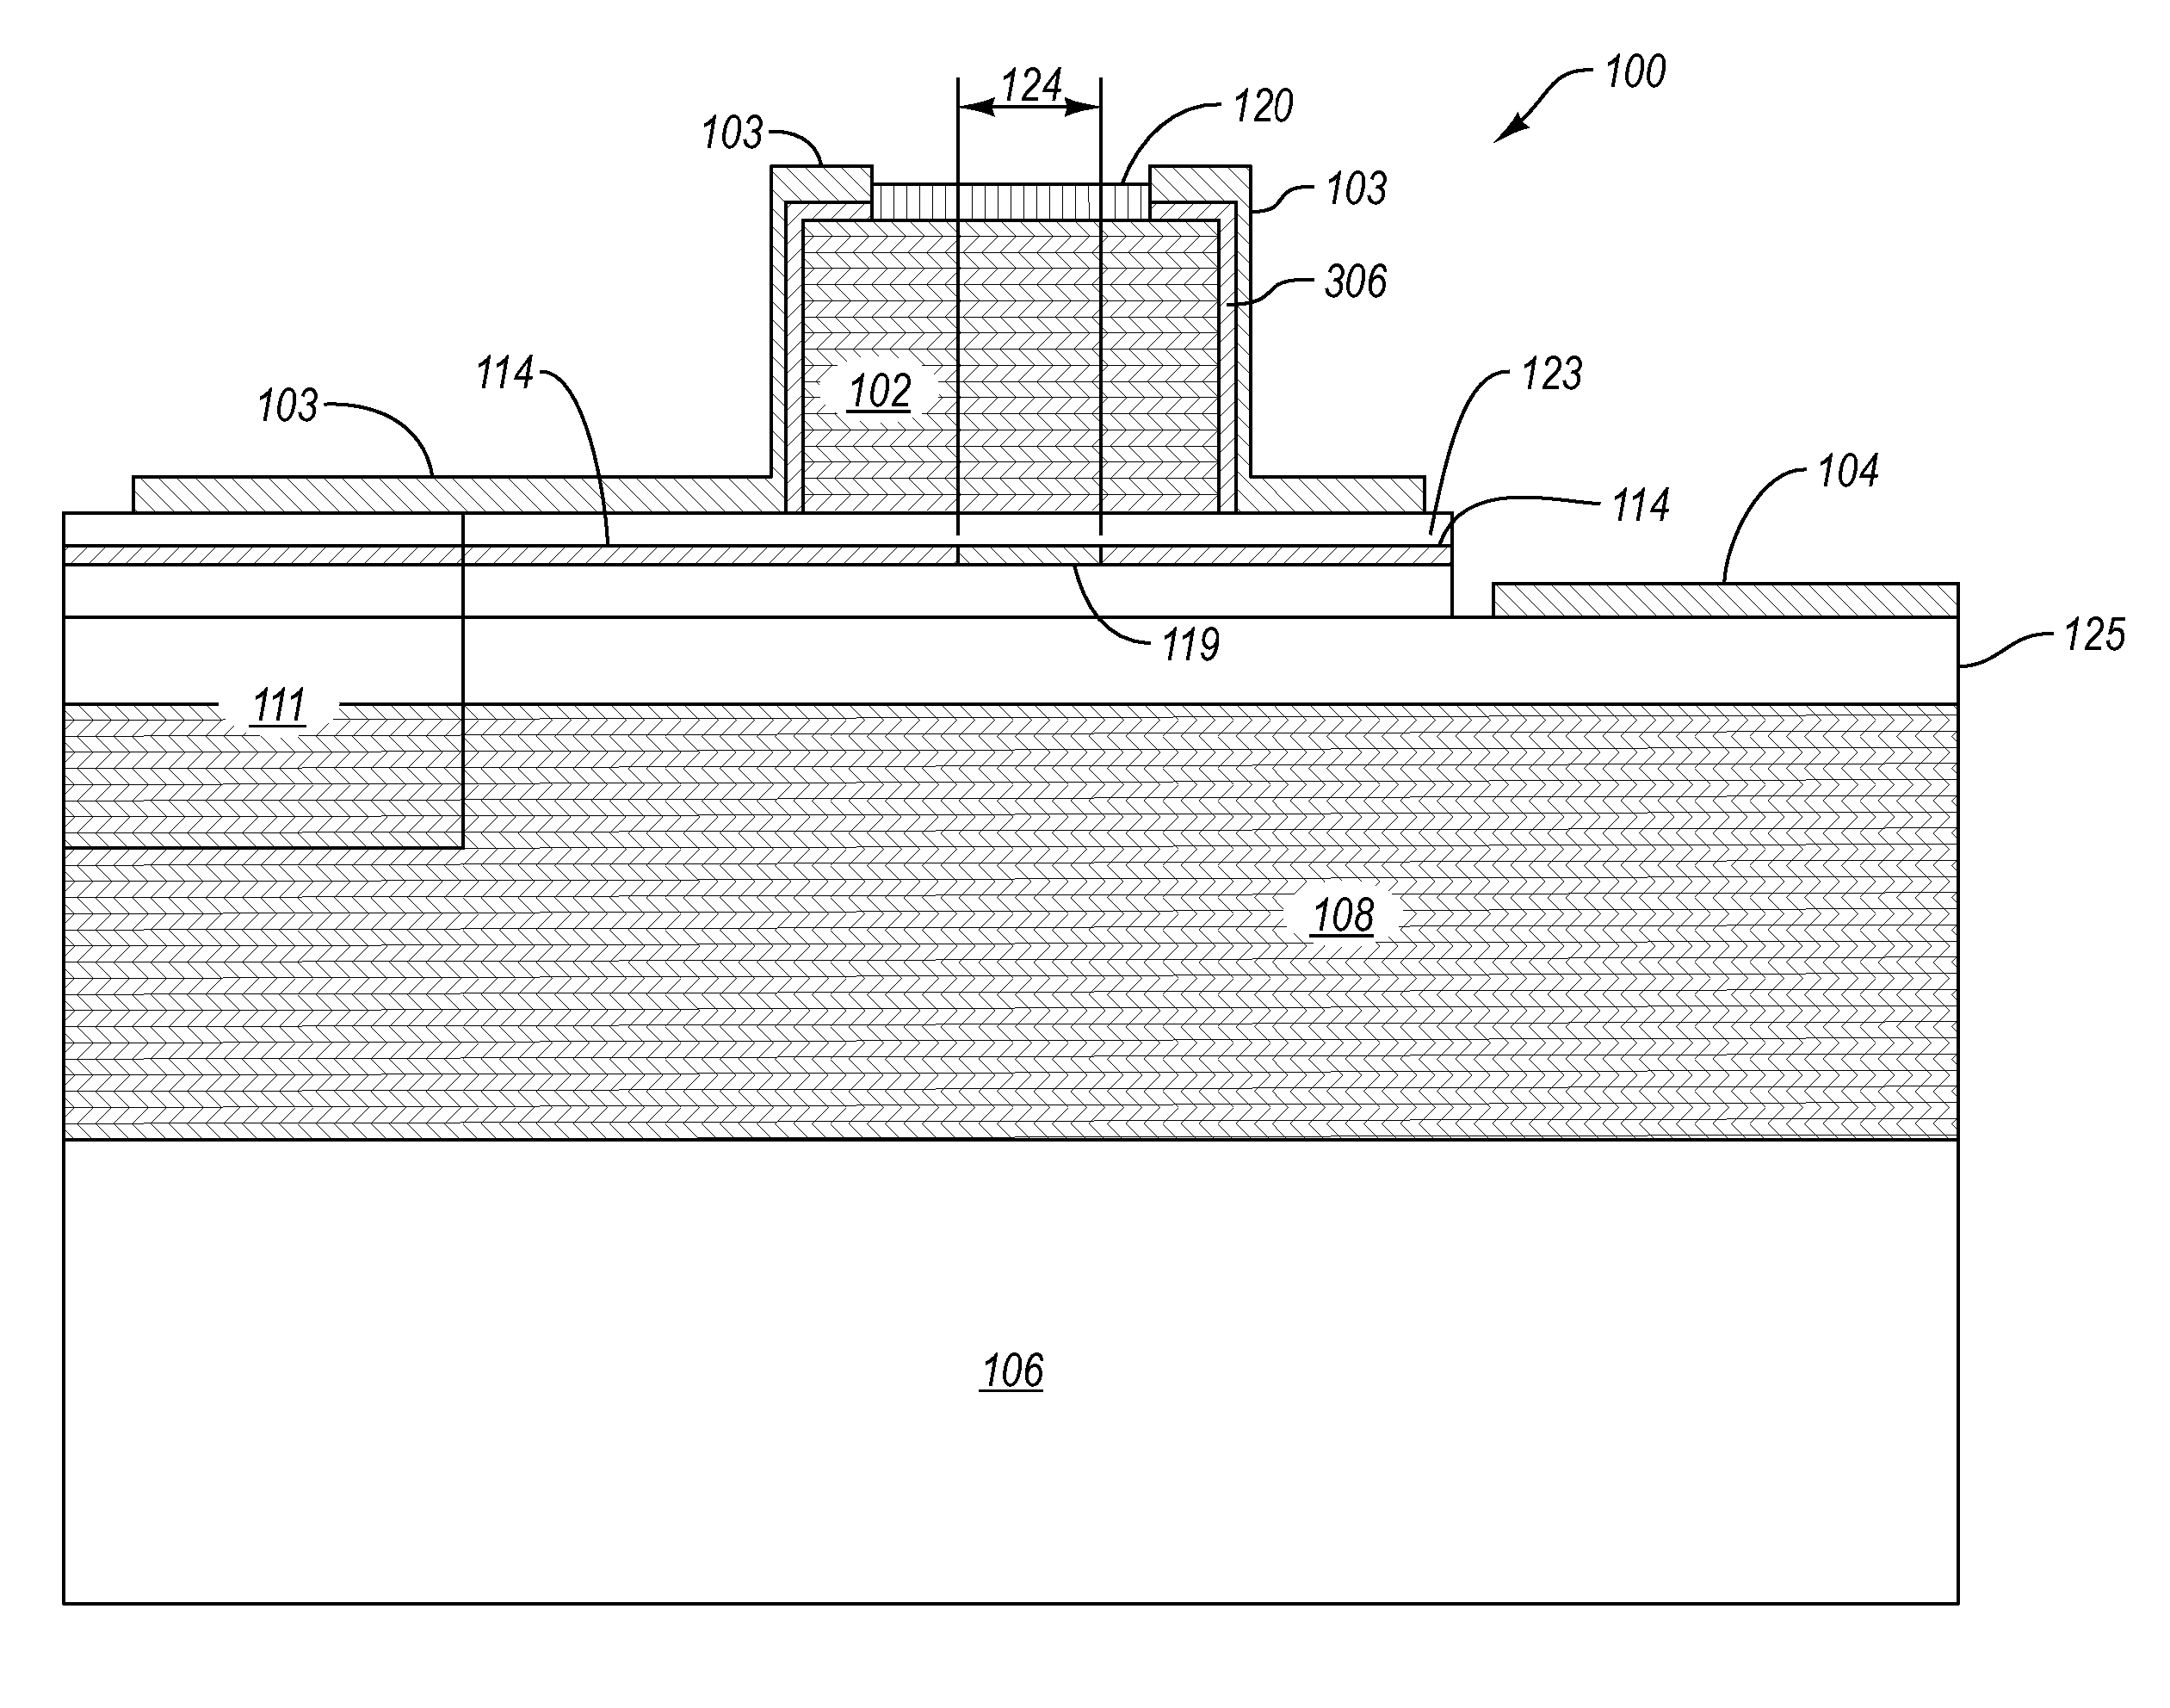 Vertical cavity surface emitting laser including trench and proton implant isolation